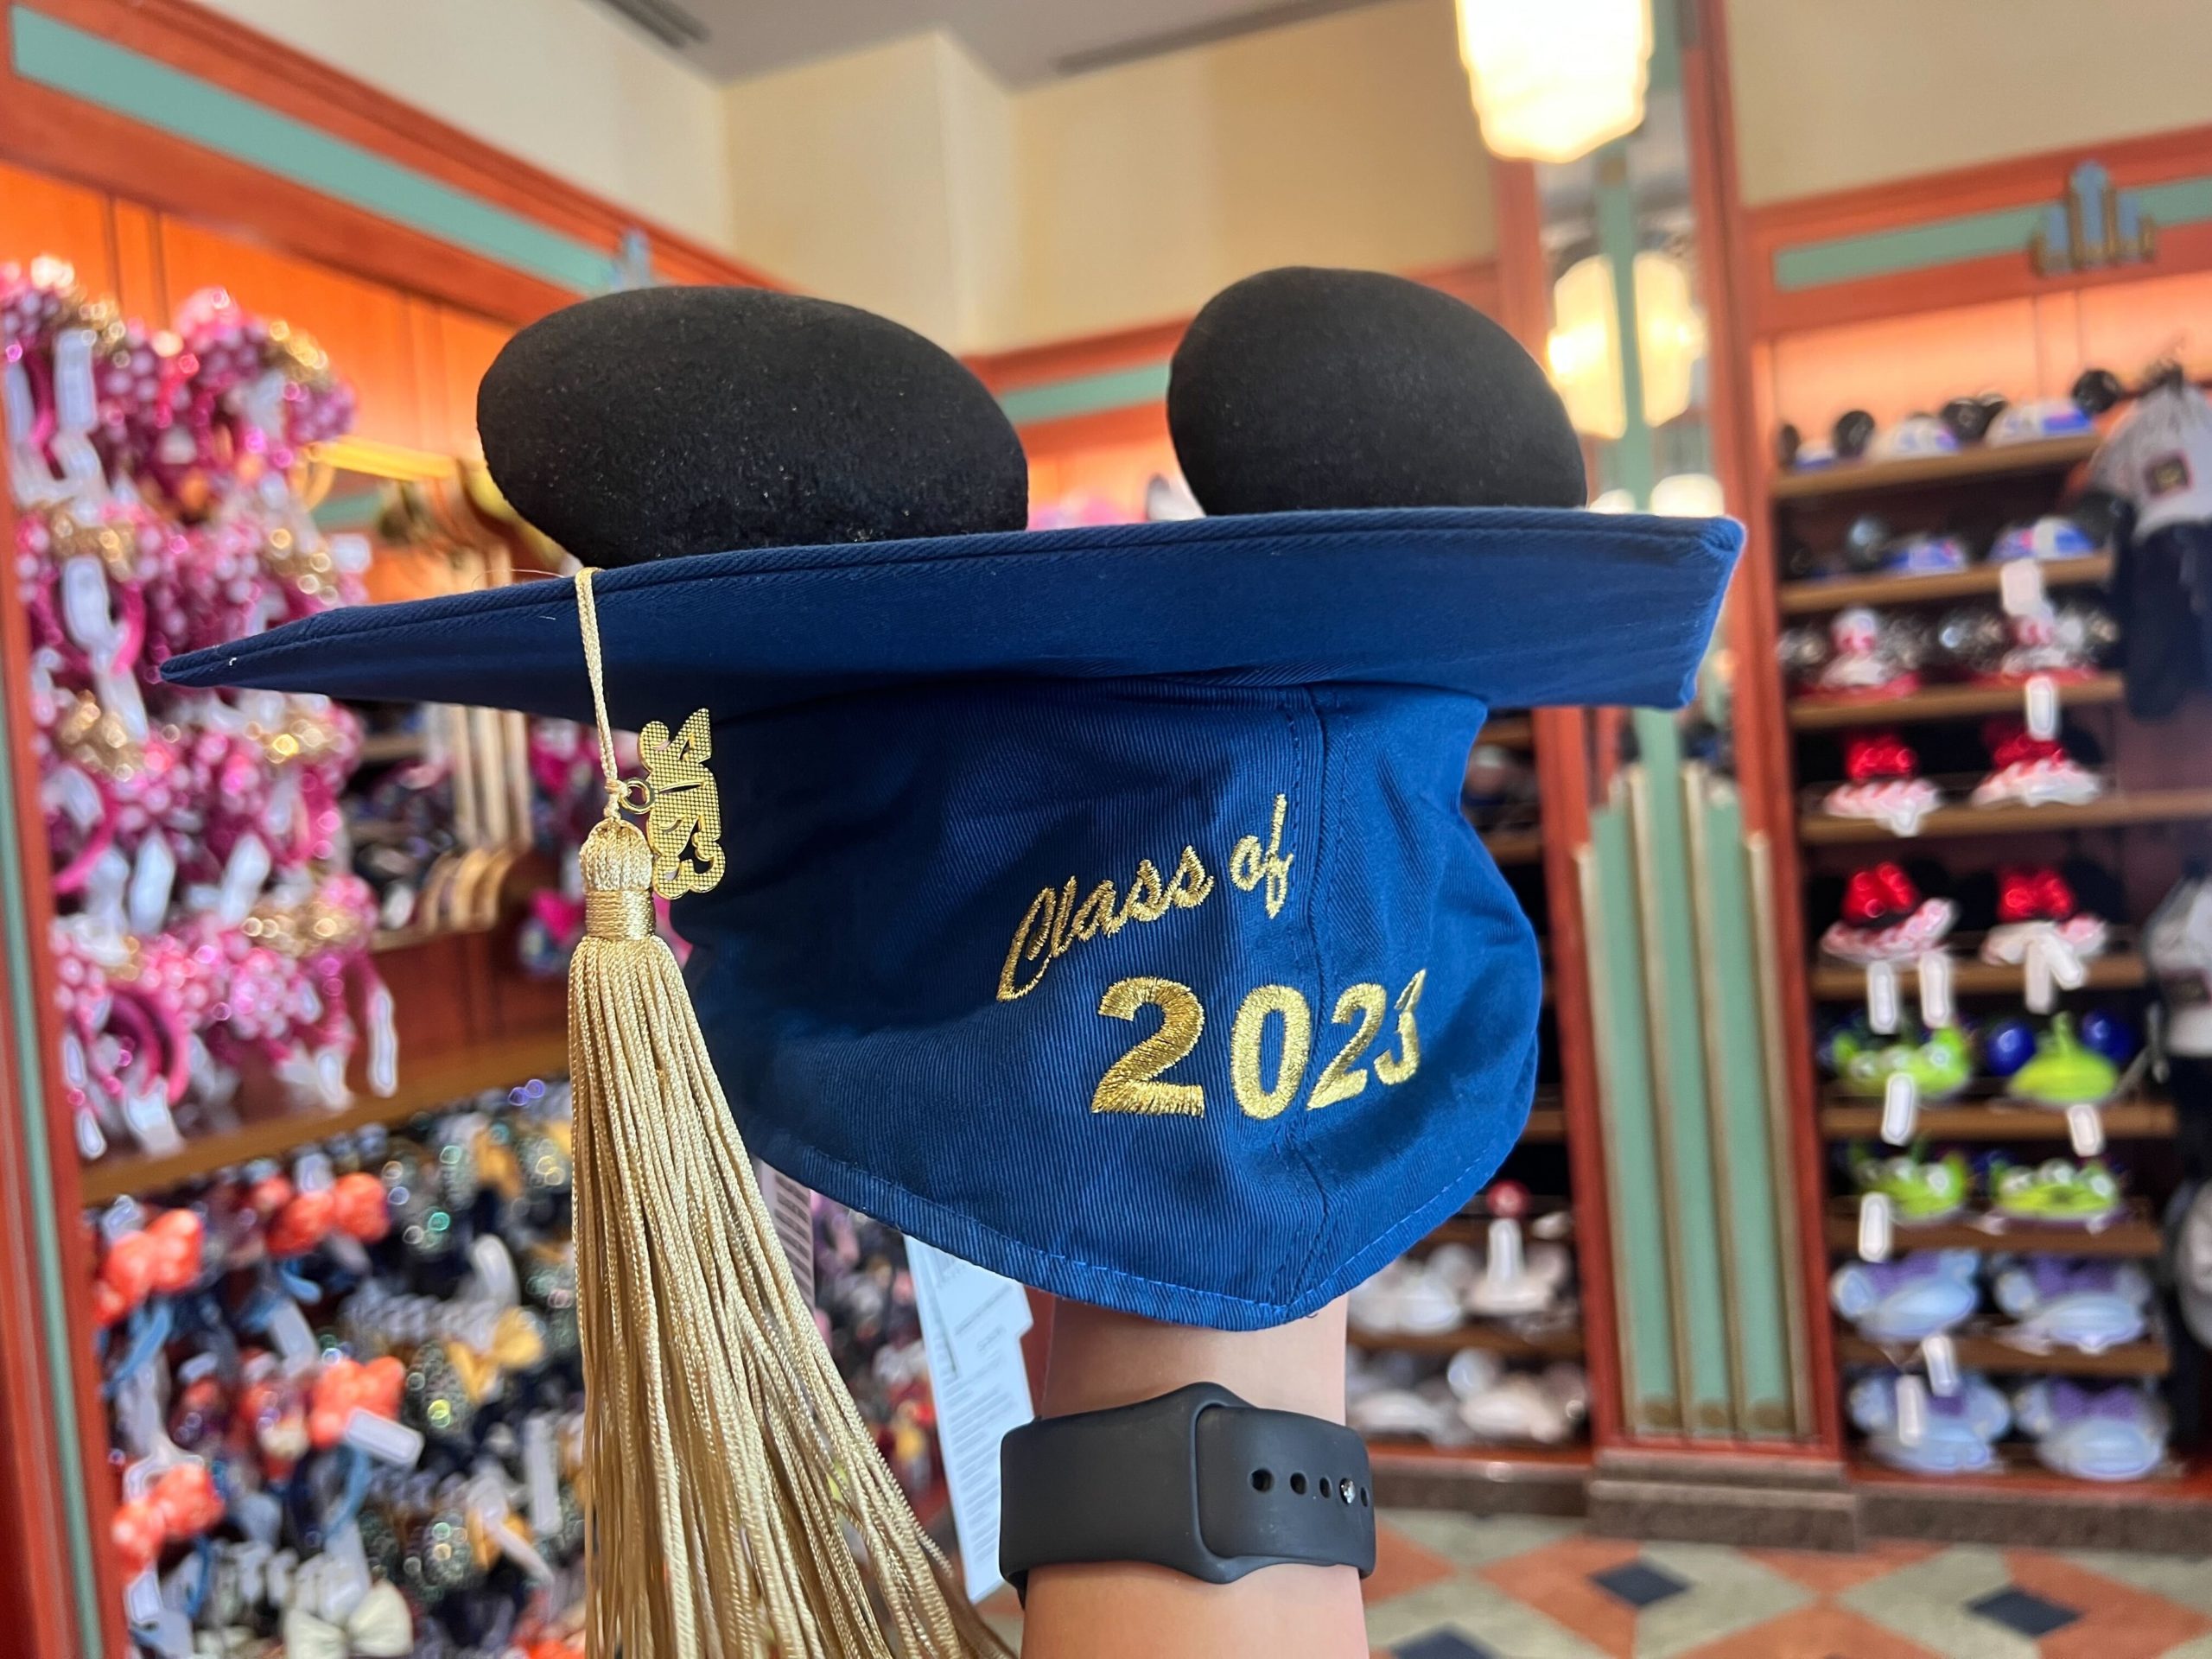 WDW News Today - PHOTOS: New Mickey and Minnie Mouse Graduation